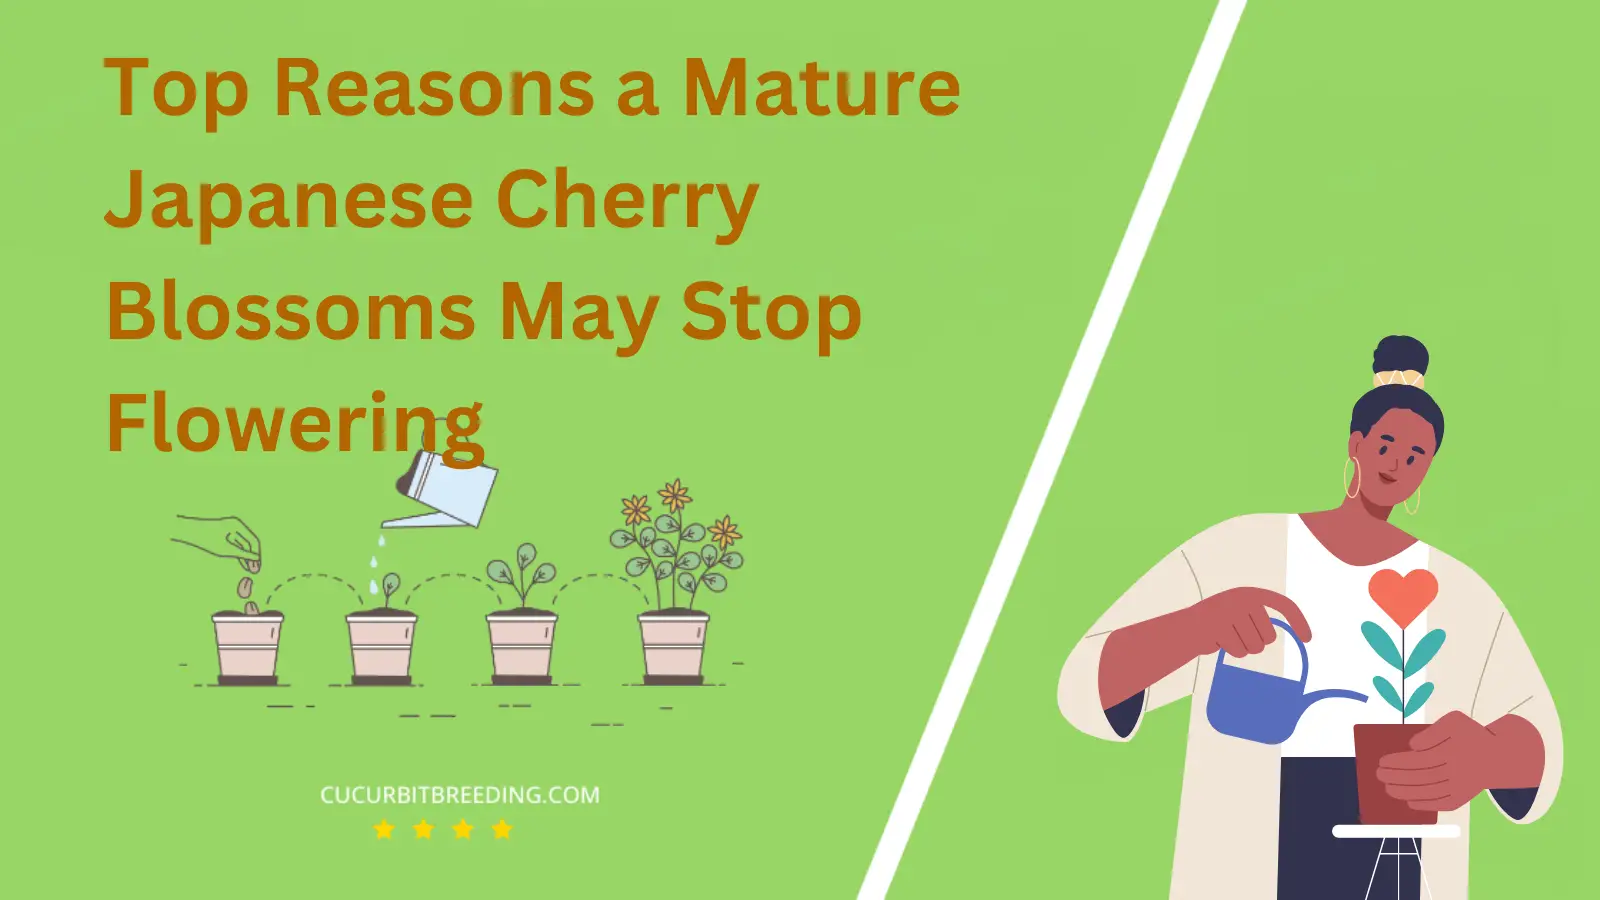 Top Reasons a Mature Japanese Cherry Blossoms May Stop Flowering